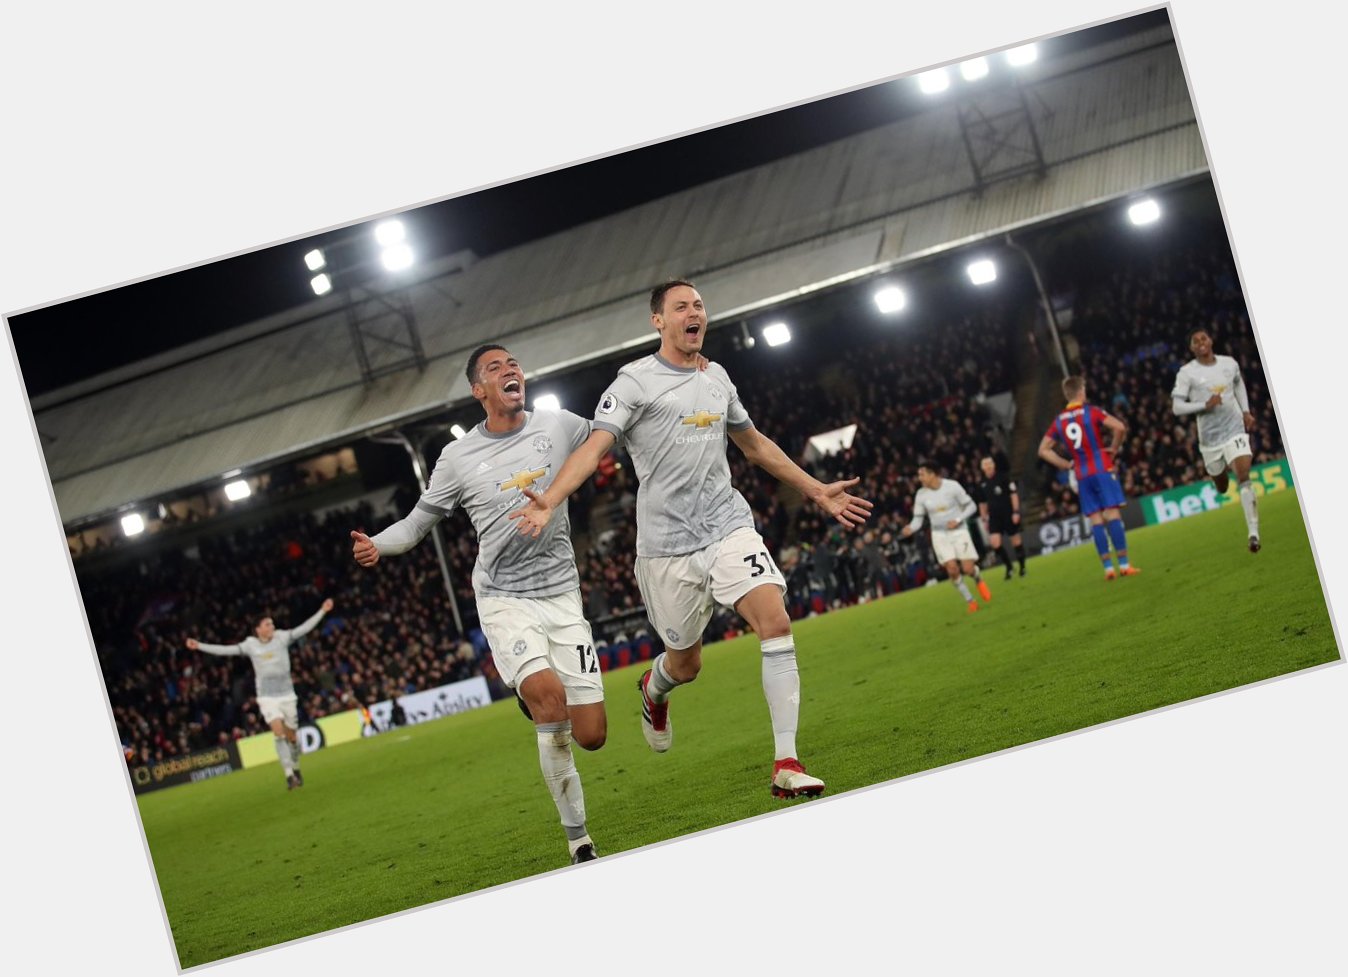 Happy 33rd birthday to Nemanja Matic! Is this his best moment in a United shirt? 